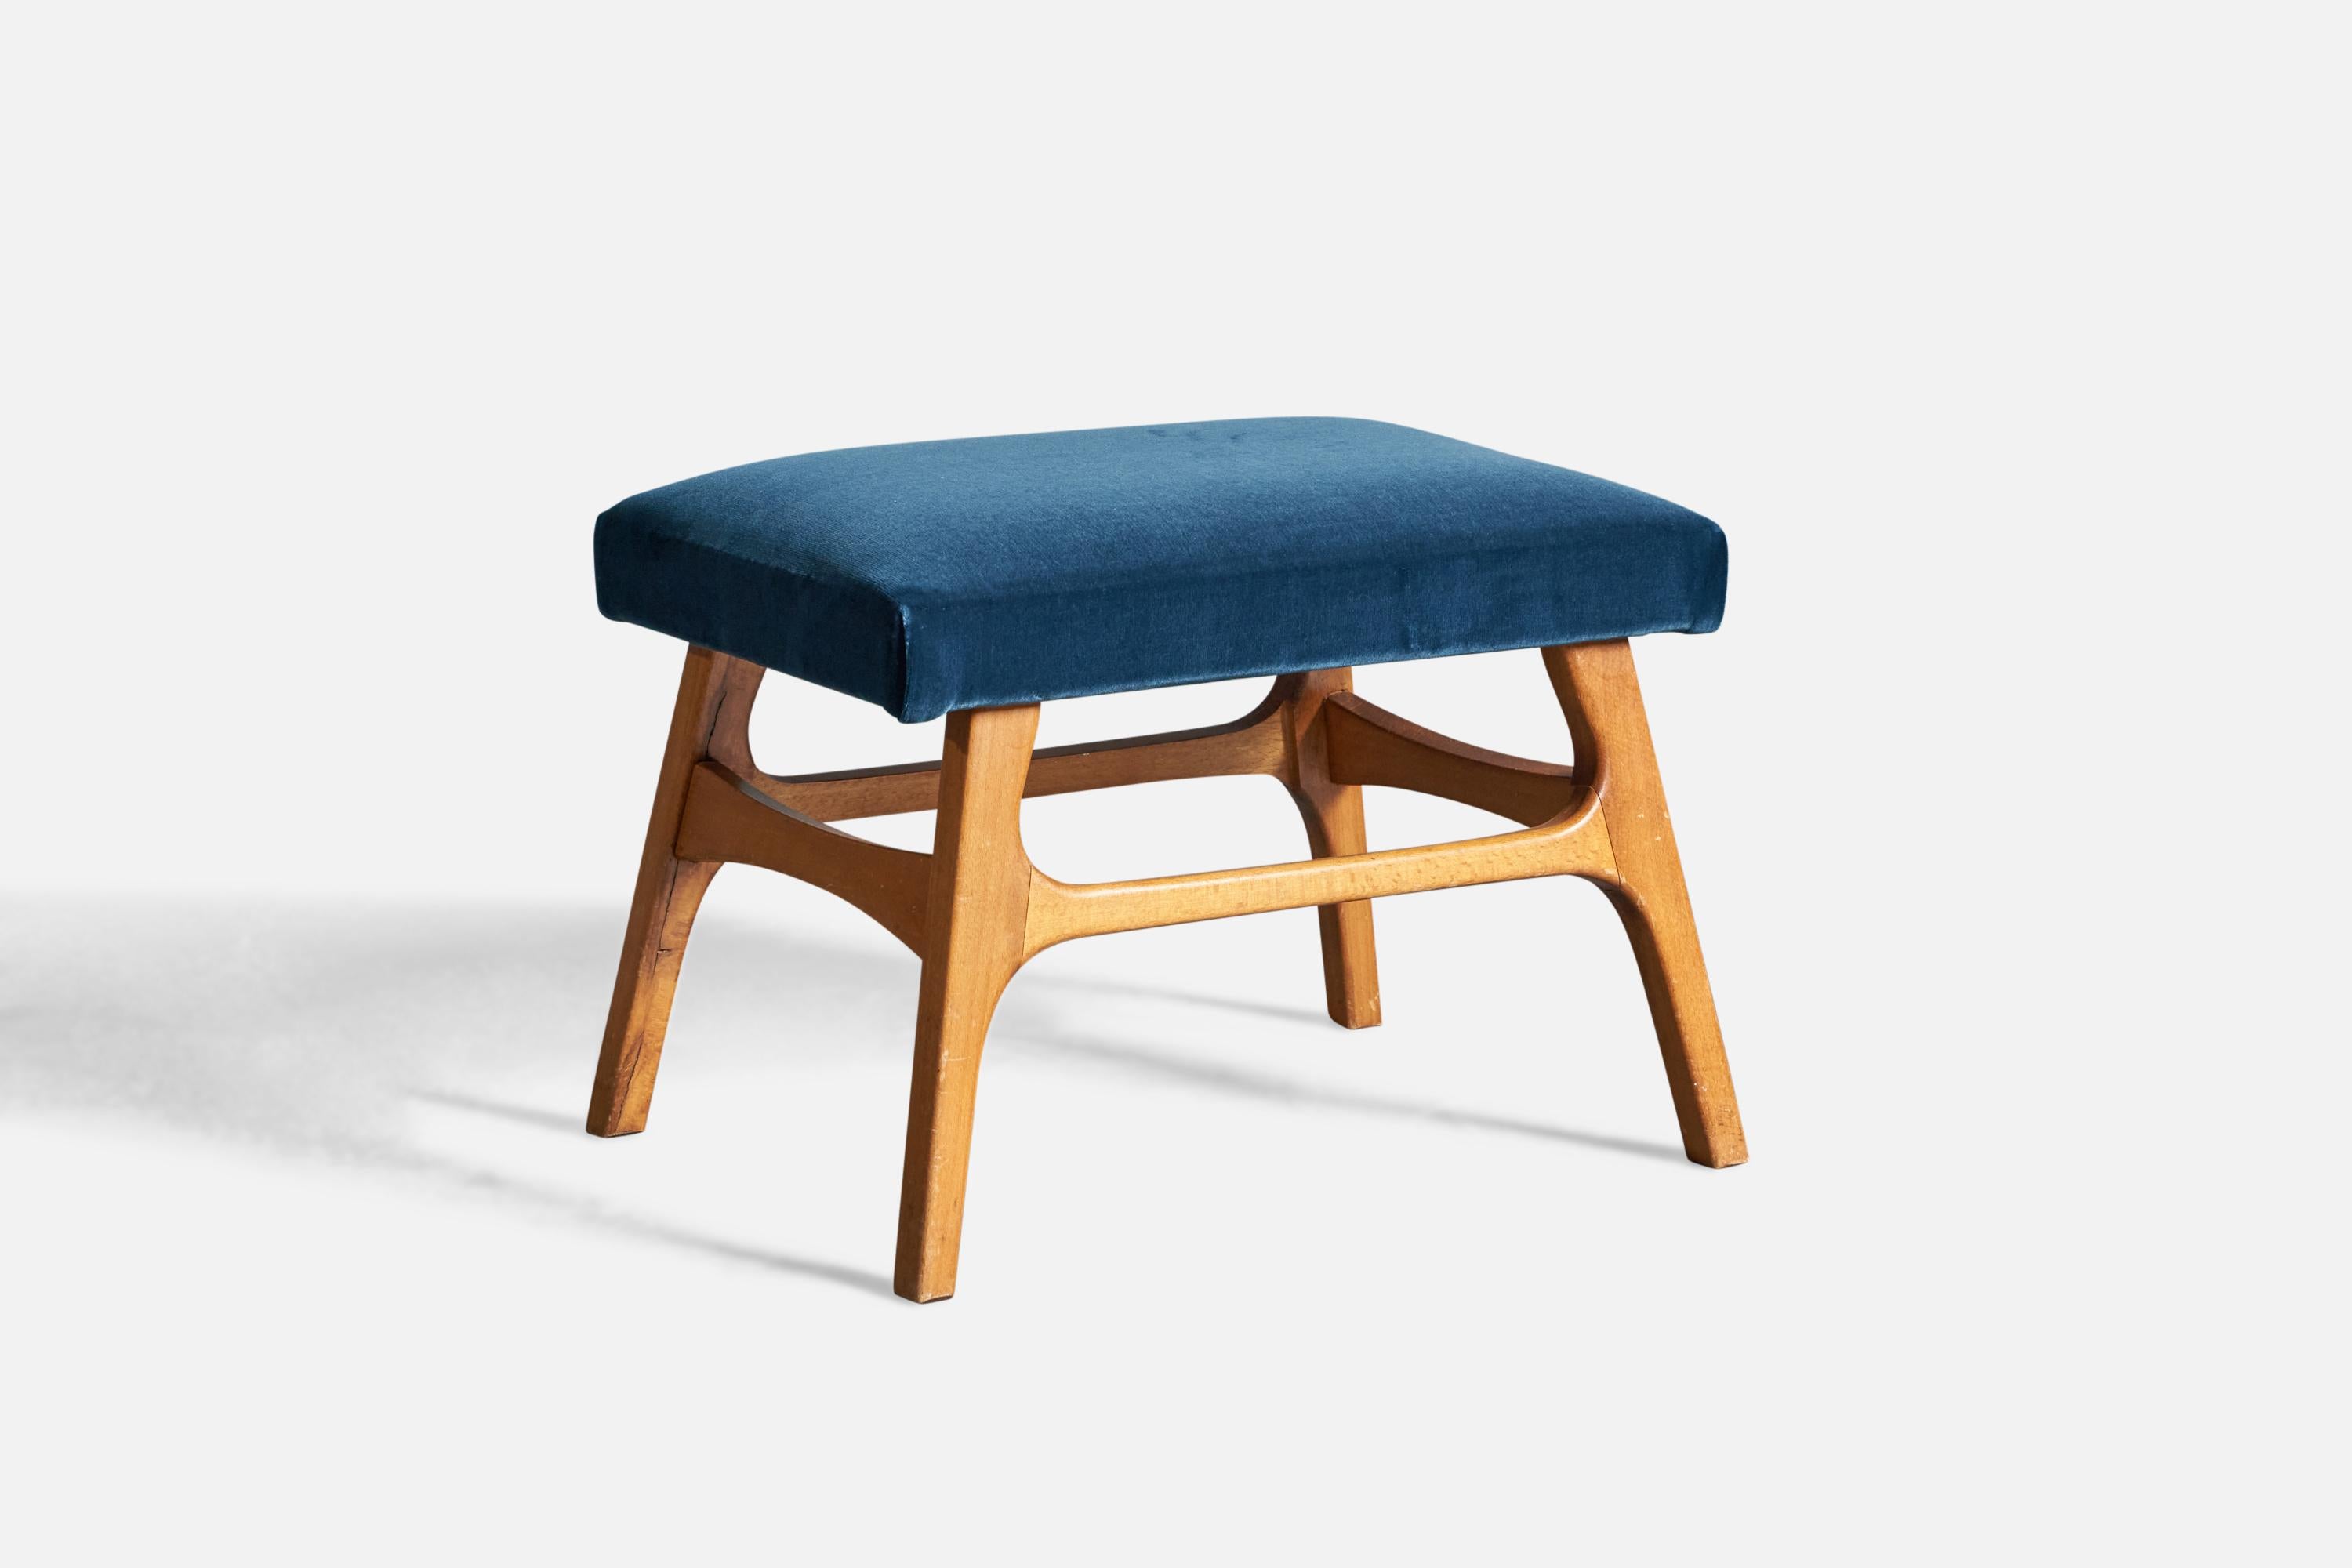 A wood and blue fabric stool, designed and produced in Sweden, 1950s
